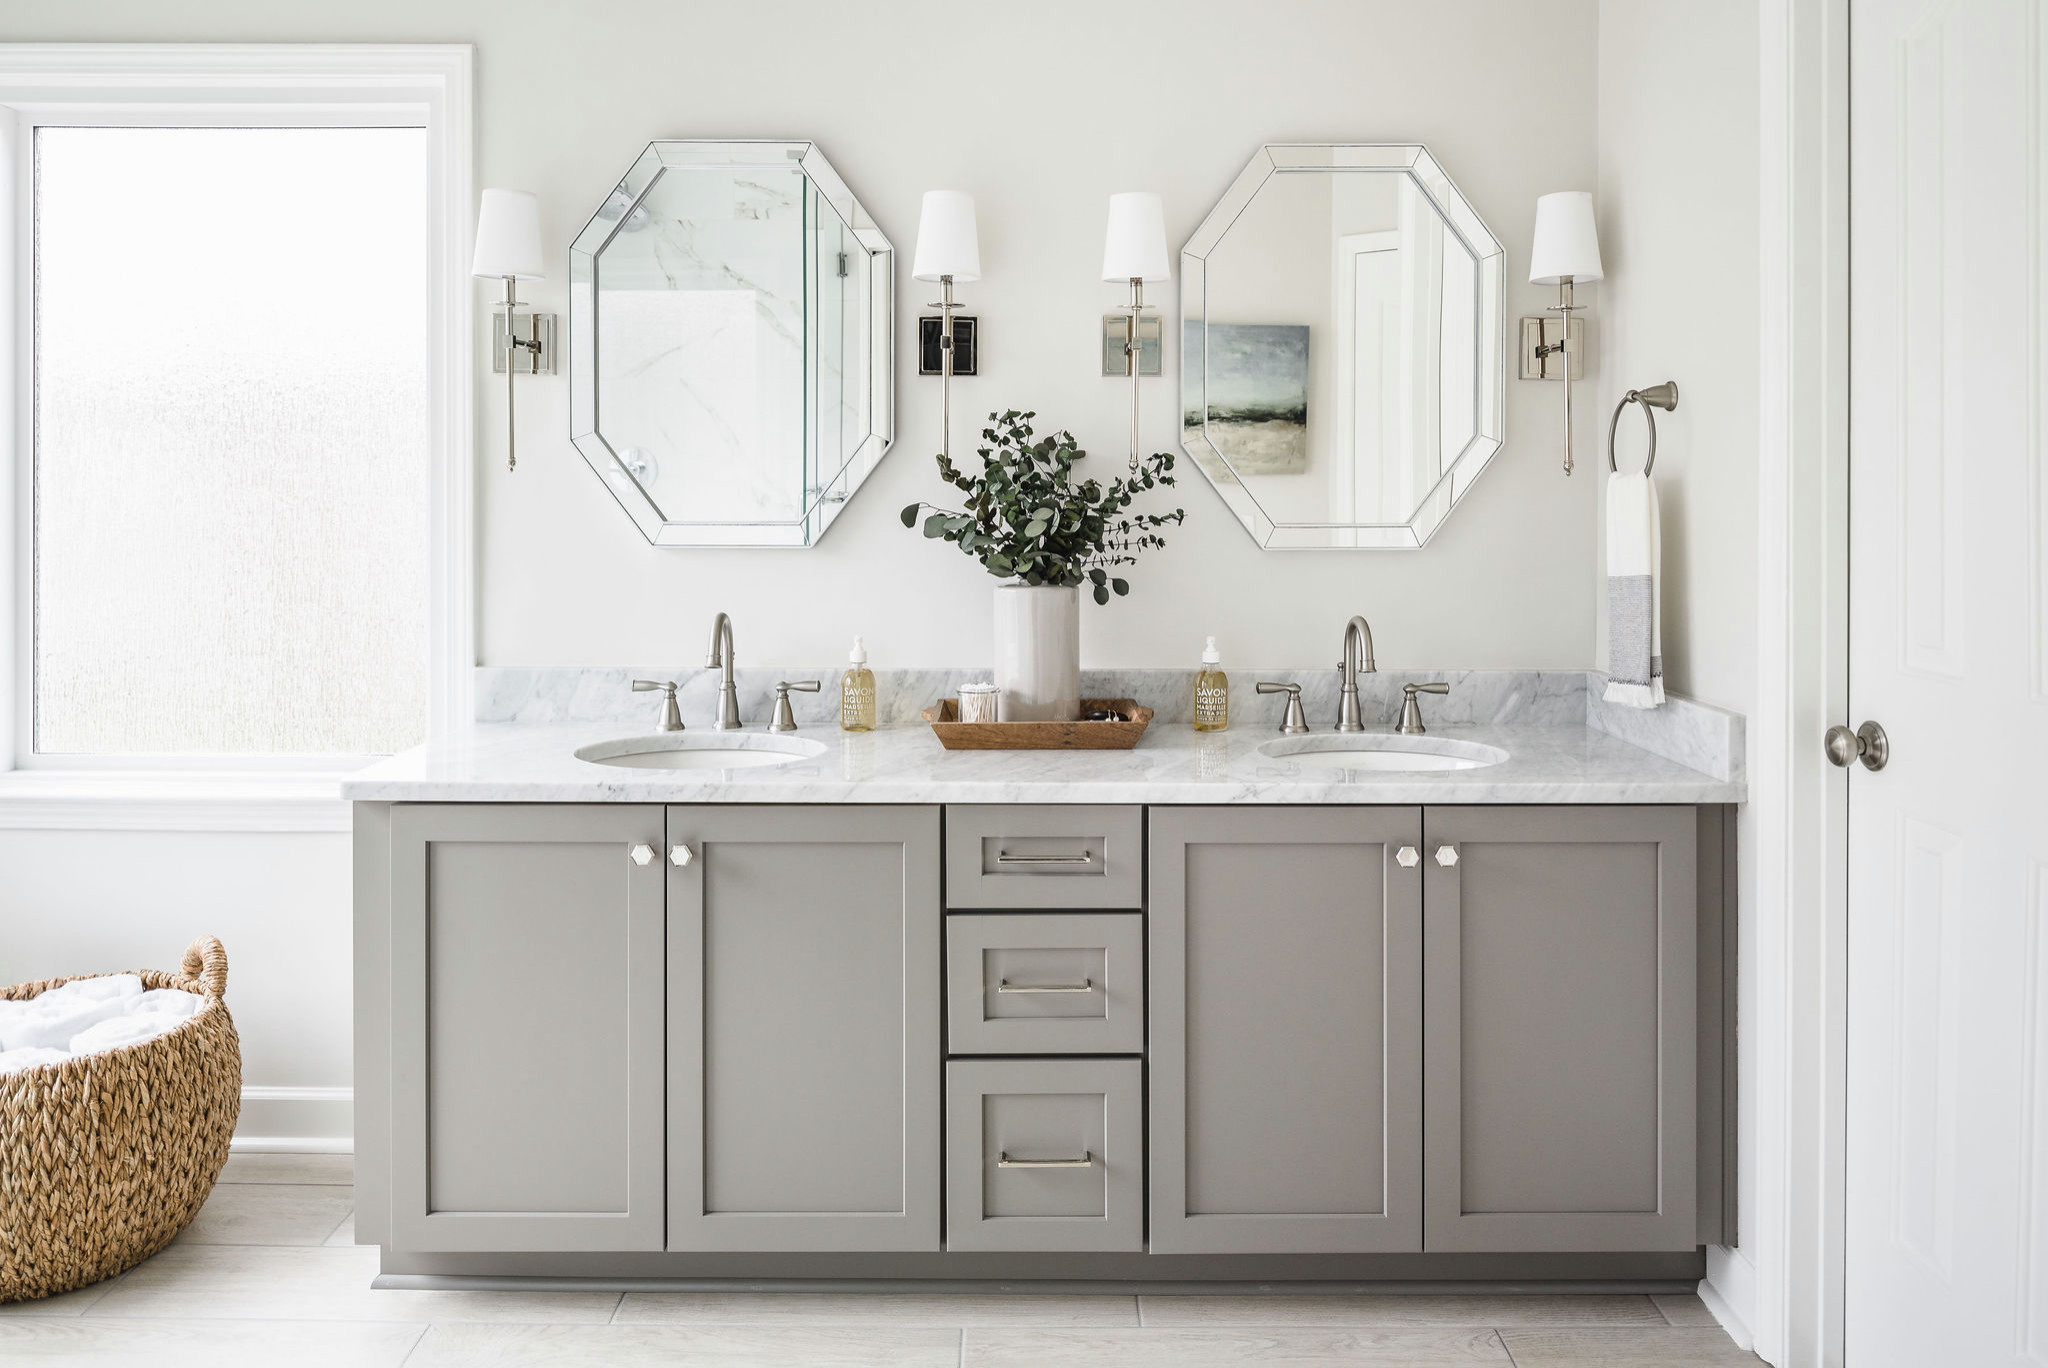 18 Bathroom Pictures & Ideas You'll Love   March, 18